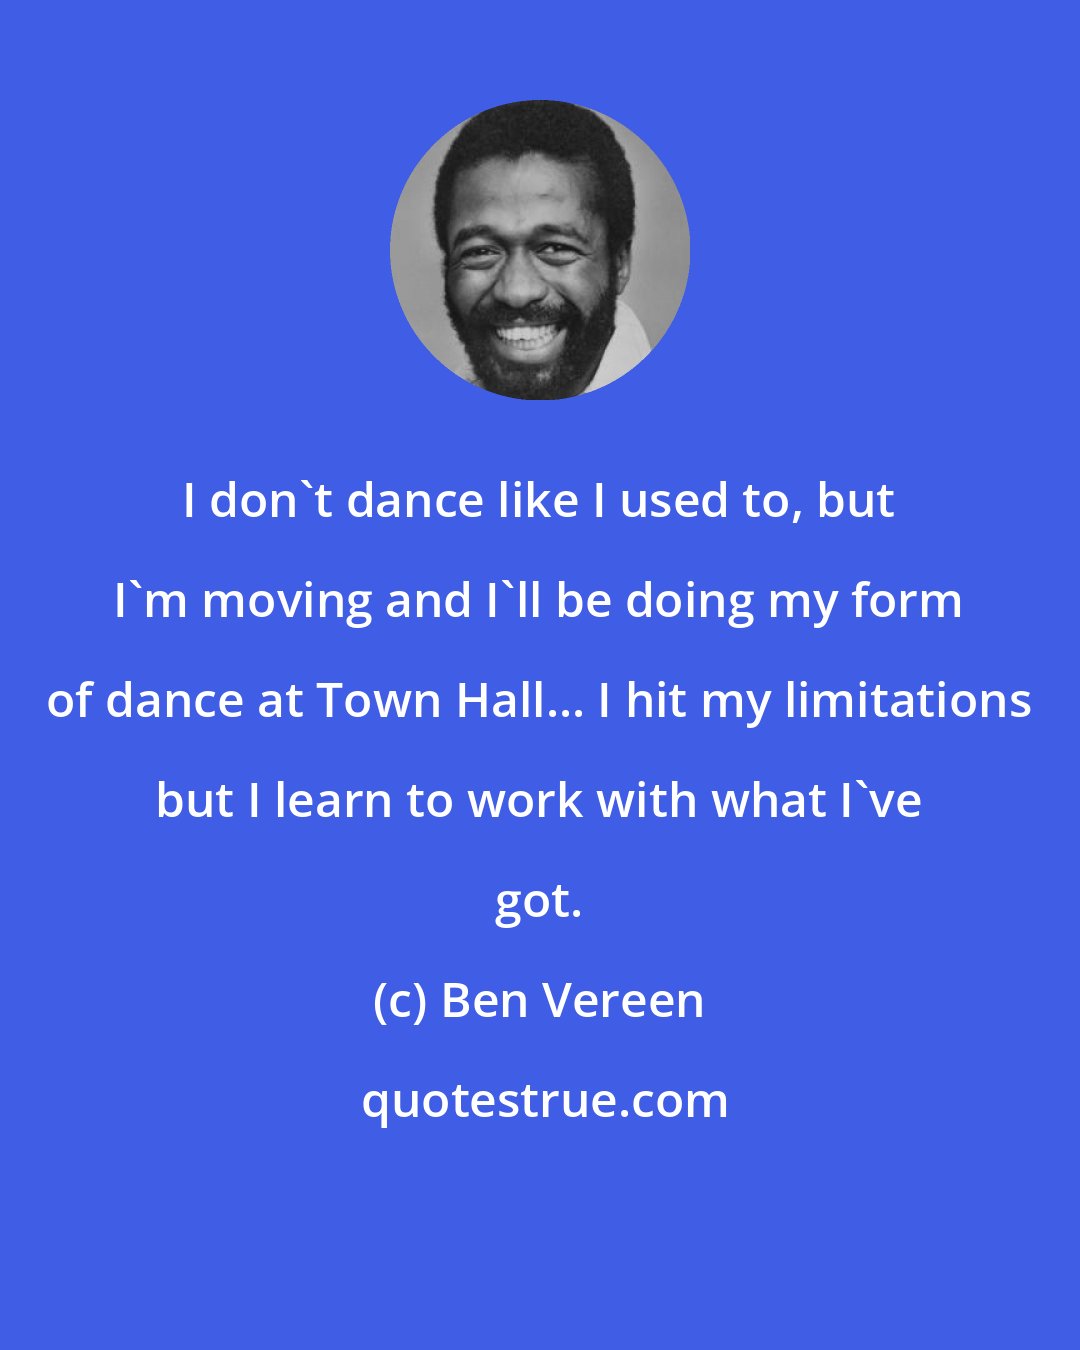 Ben Vereen: I don't dance like I used to, but I'm moving and I'll be doing my form of dance at Town Hall... I hit my limitations but I learn to work with what I've got.